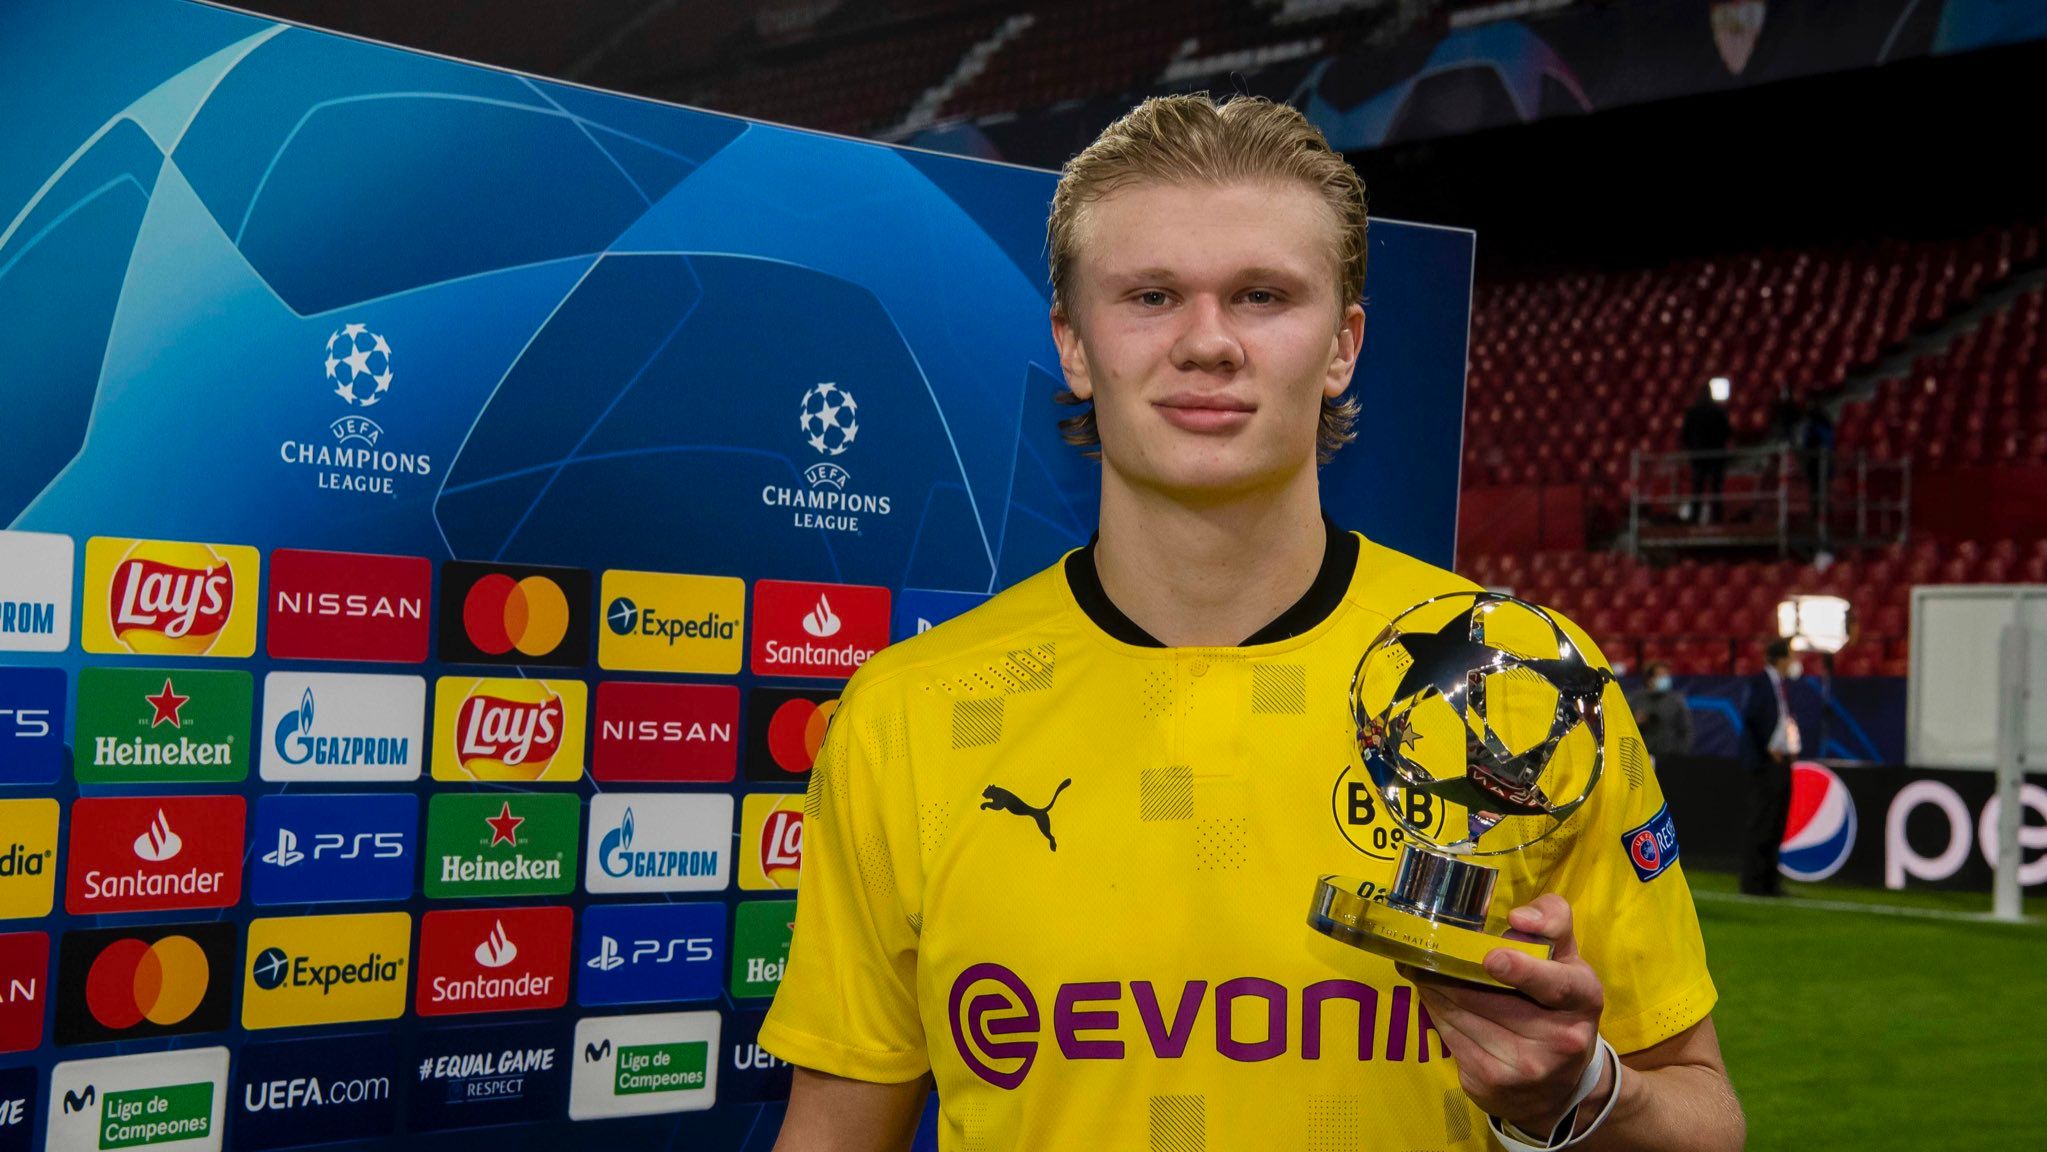 Champions League: Erling Haaland powers Borussia Dortmund to crucial away win against Sevilla